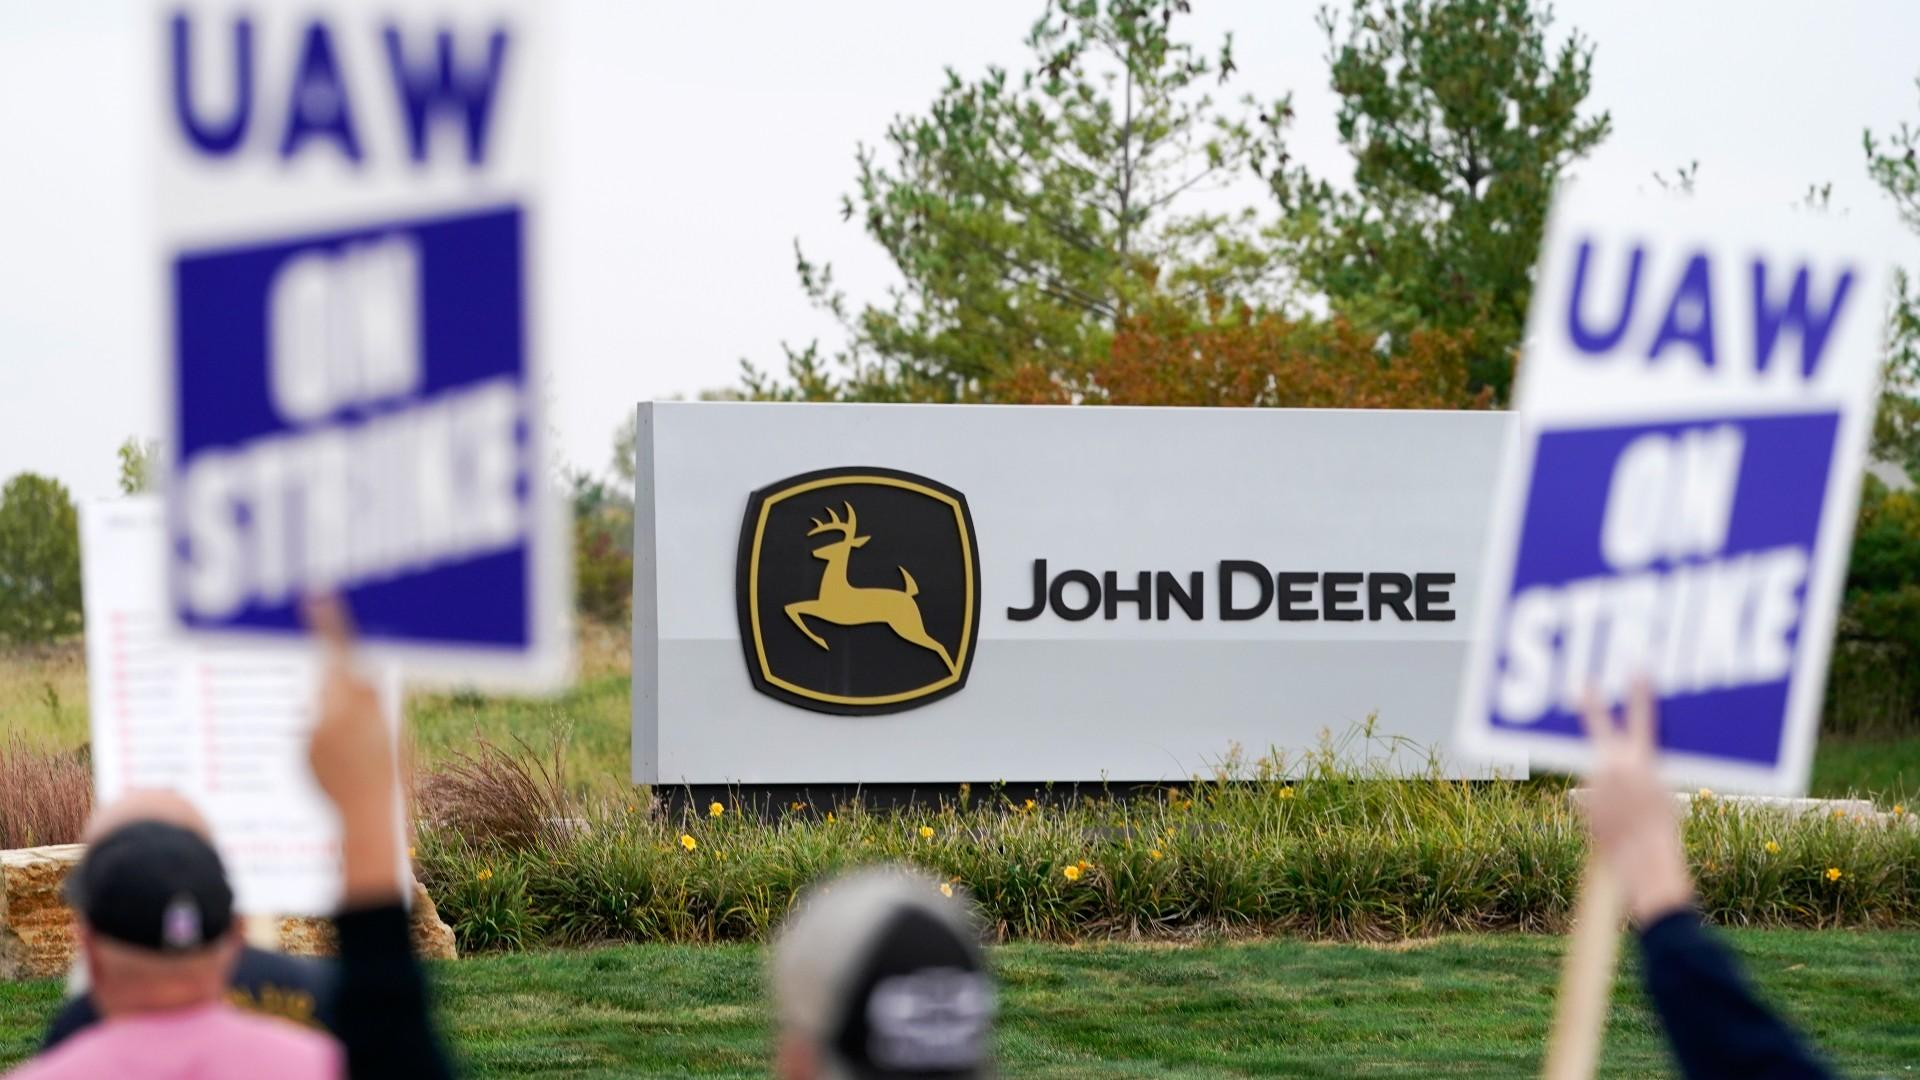 Members of the United Auto Workers strike outside of a John Deere plant, Wednesday, Oct. 20, 2021, in Ankeny, Iowa. (AP Photo / Charlie Neibergall, File)